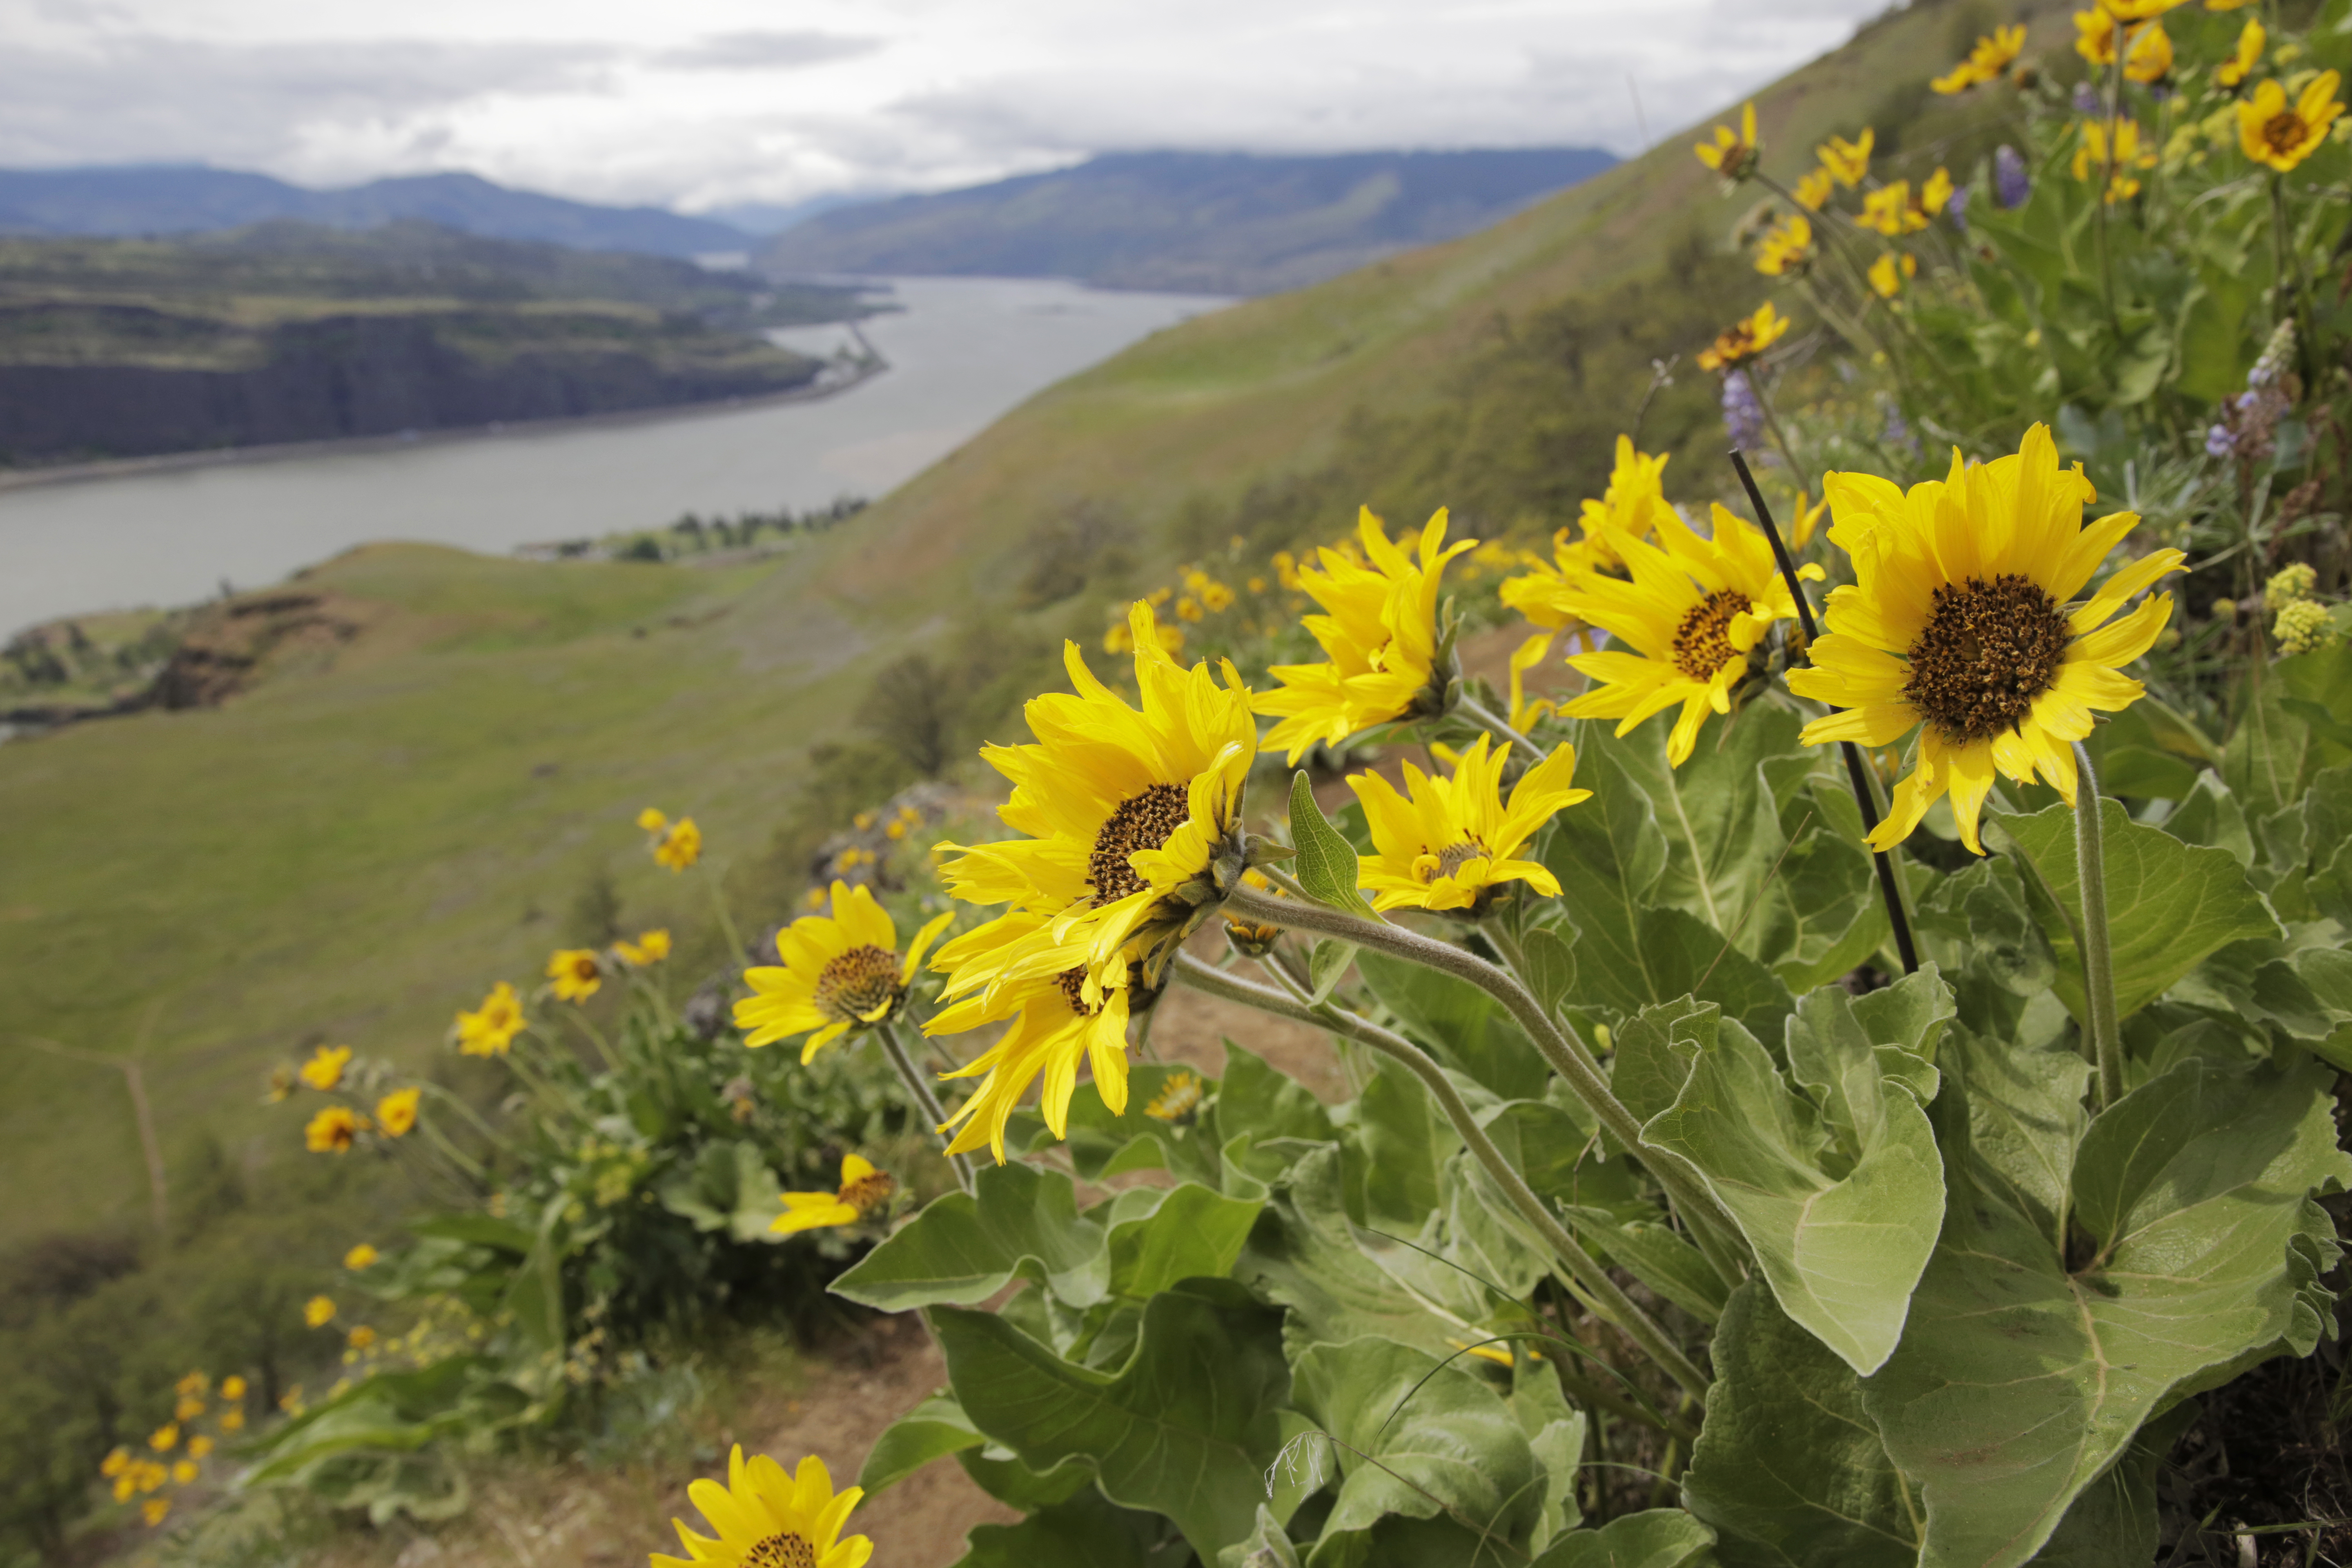 Take a zigzag road trip through the Columbia River Gorge – Here is Oregon 